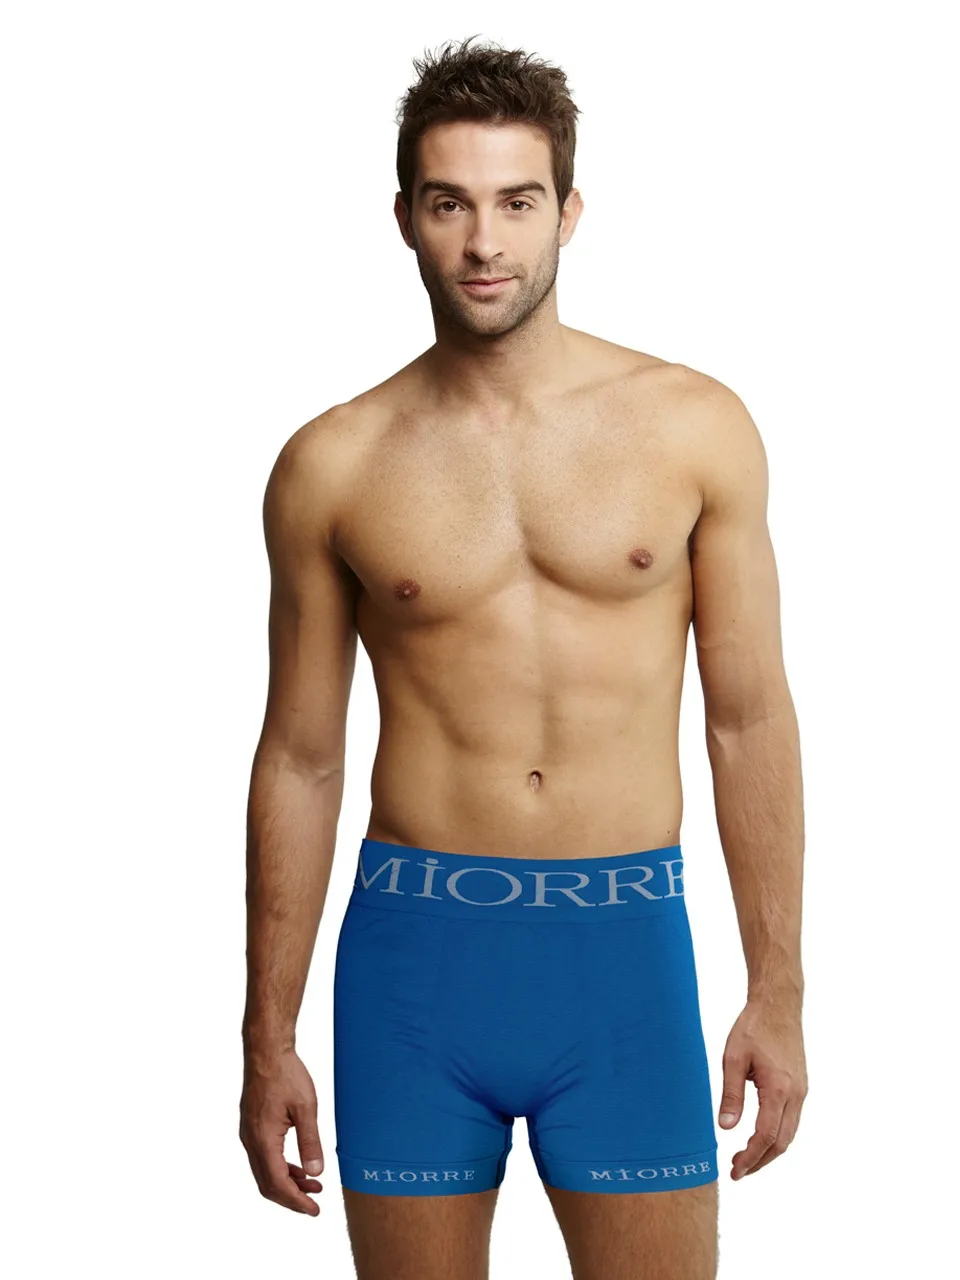 Miorre Oem Wholesale Quality Mens Underwear Seamless Boxer Brief Assorted Colors Buy Boxer 9849